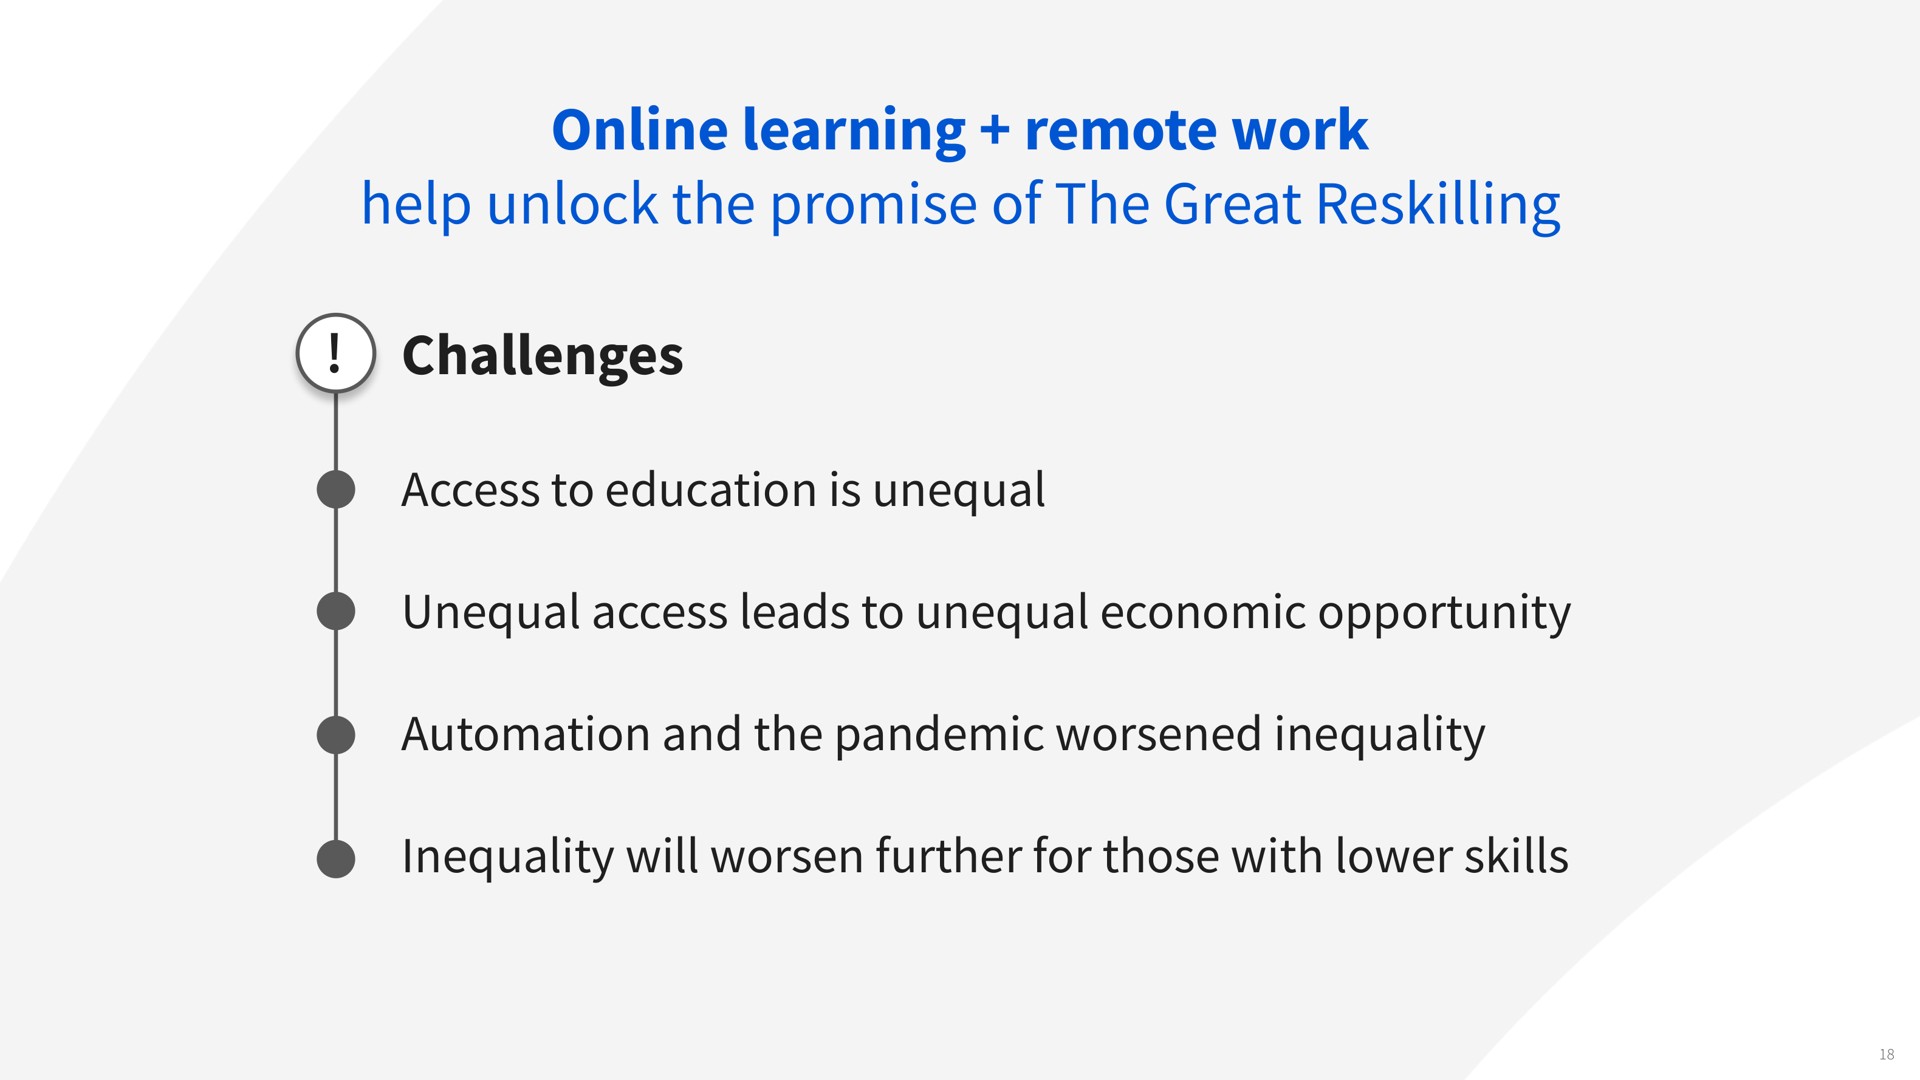 learning remote work help unlock the promise of the great challenges access to education is unequal unequal access leads to unequal economic opportunity and the pandemic worsened inequality inequality will worsen further for those with lower skills | Coursera